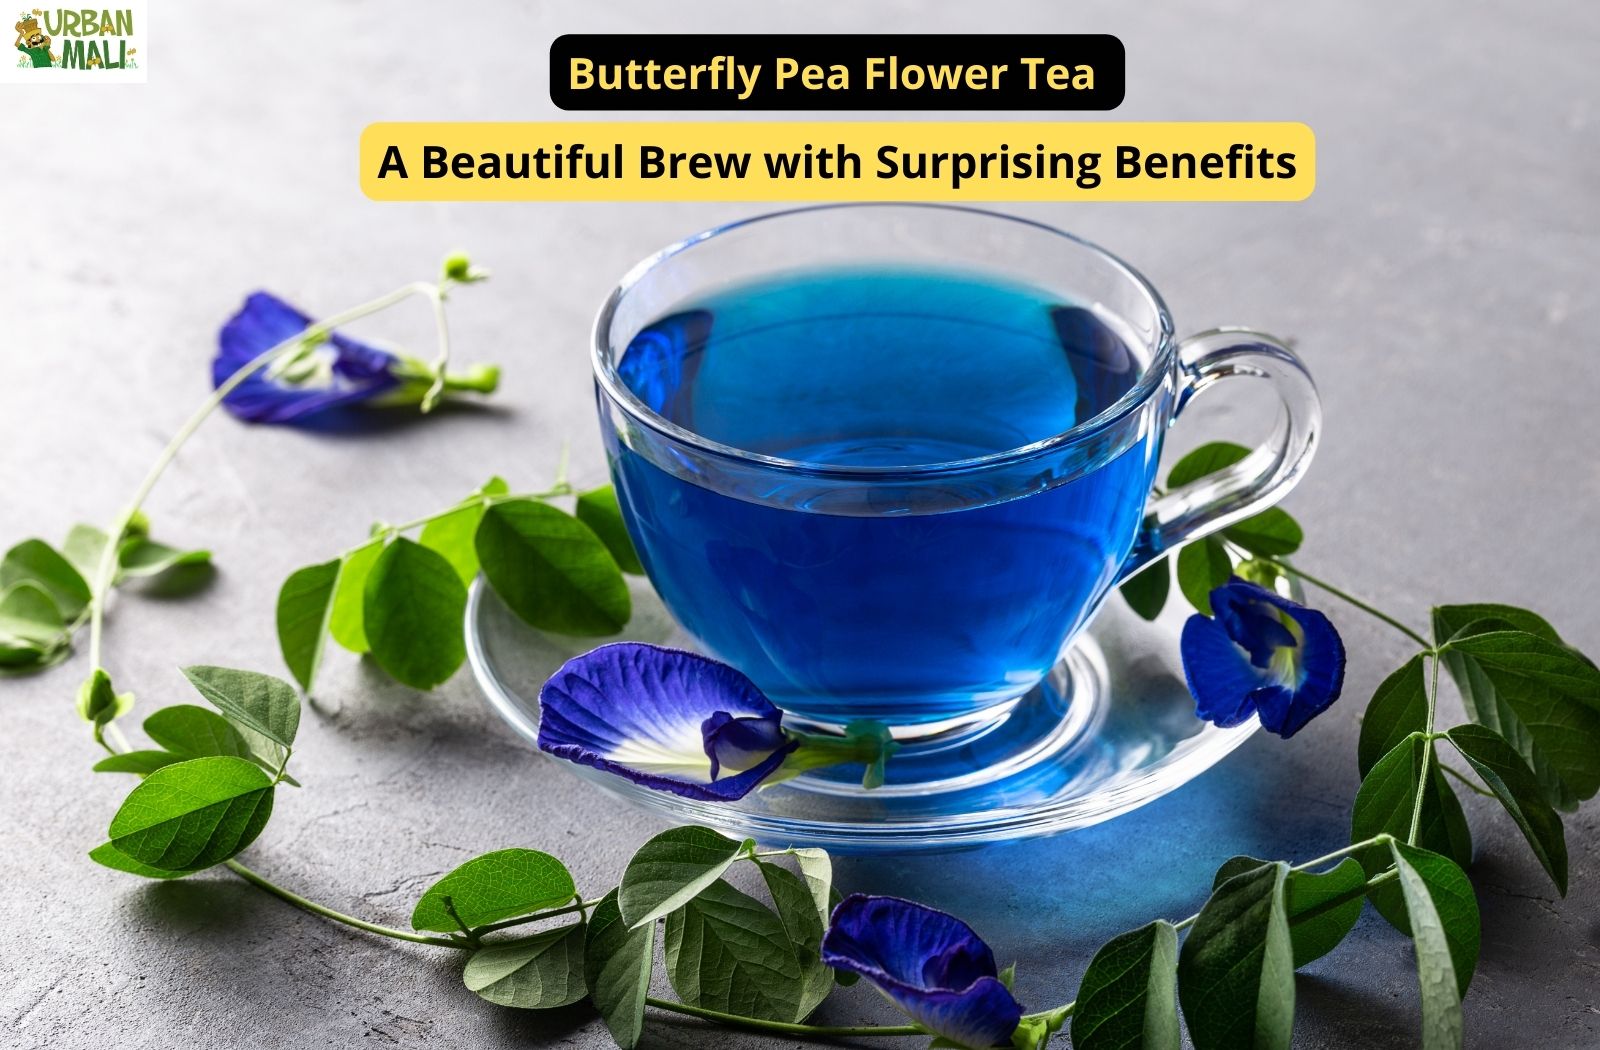 Butterfly Pea Flower Tea: A Beautiful Brew with Surprising Benefits